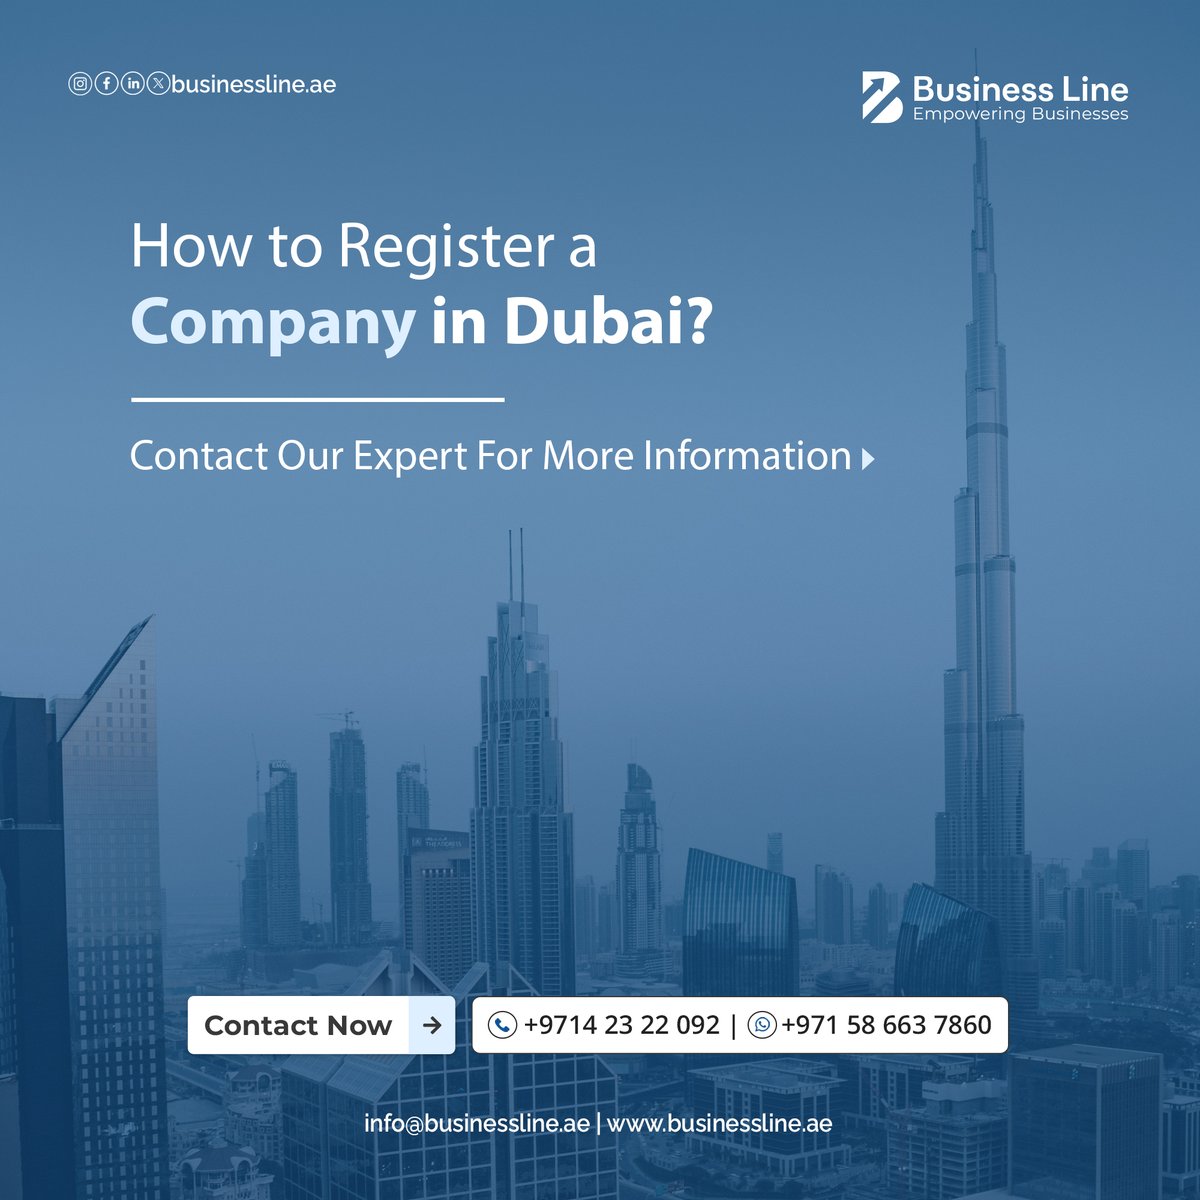 How to Register a Company in Dubai?

Contact Our Expert For More Information >
Call: +9714 23 22 092 | +971 58 663 7860

#dubaibusinesssetup #companyregistrationdubai #businesssetup #entrepreneurdubai #startupsdubai #dubaientrepreneur #businessconsultancydubai #dubaiinvestment